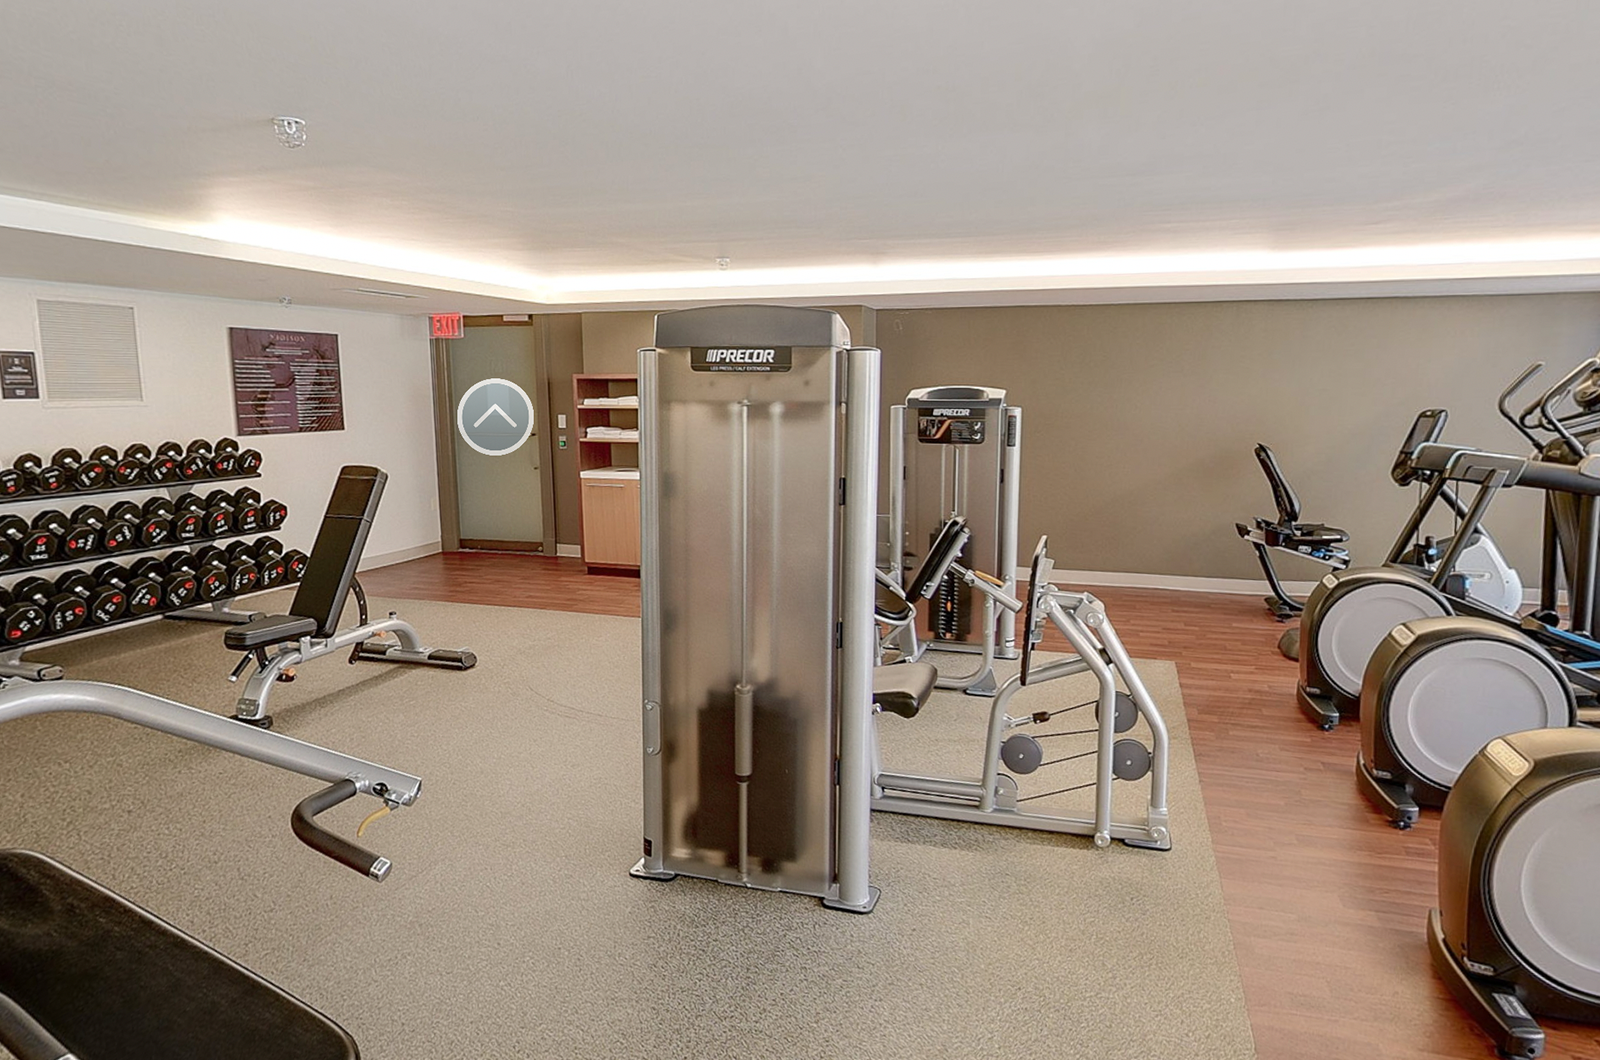 360 Virtual Tours For Gyms and Amenities